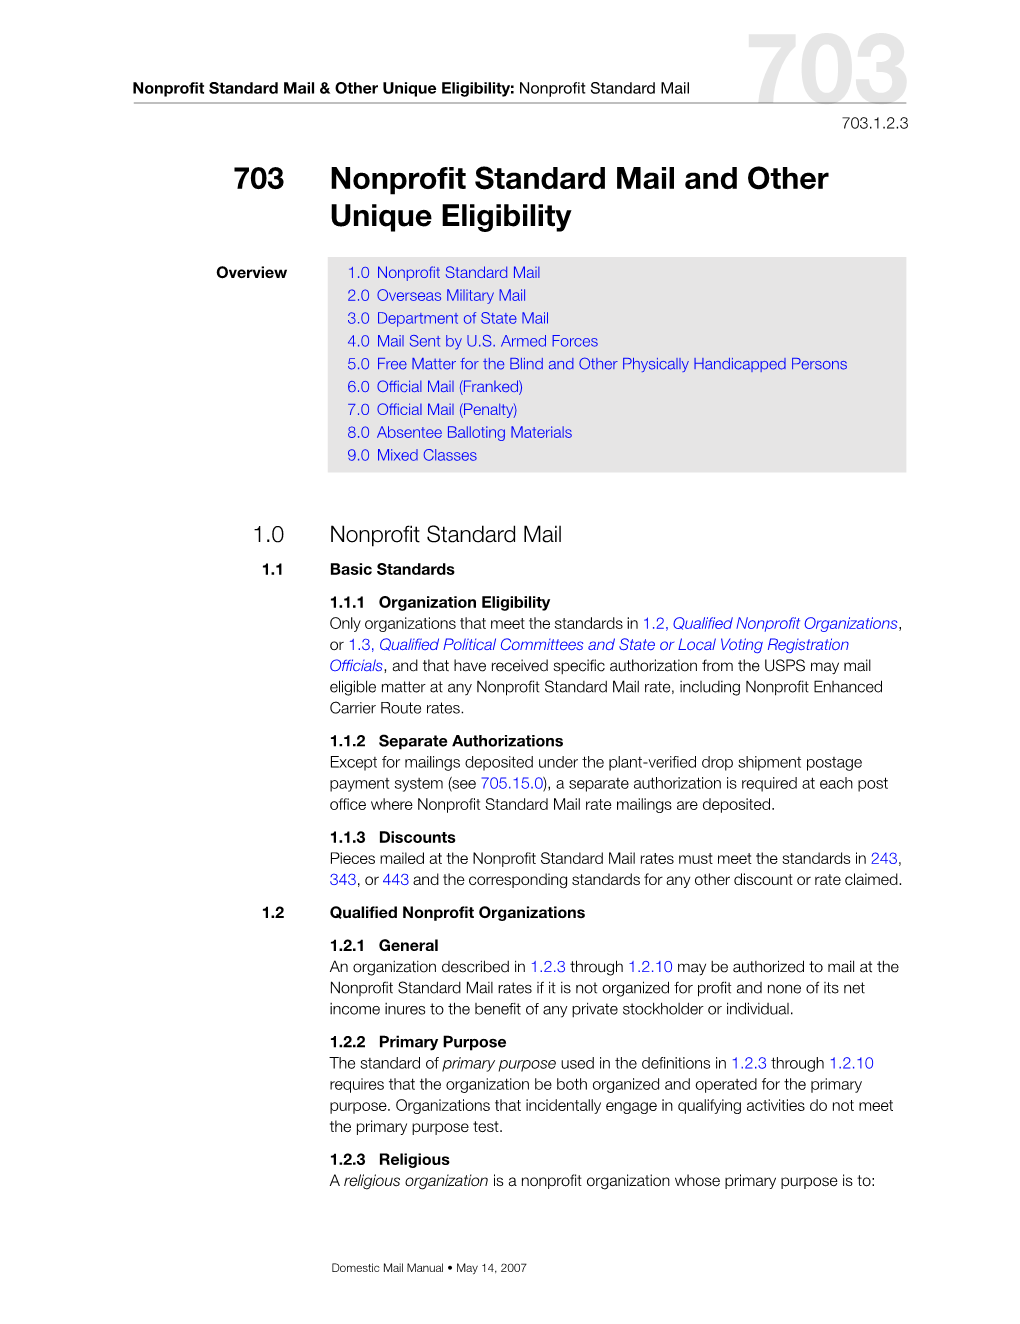 703 Nonprofit Standard Mail and Other Unique Eligibility